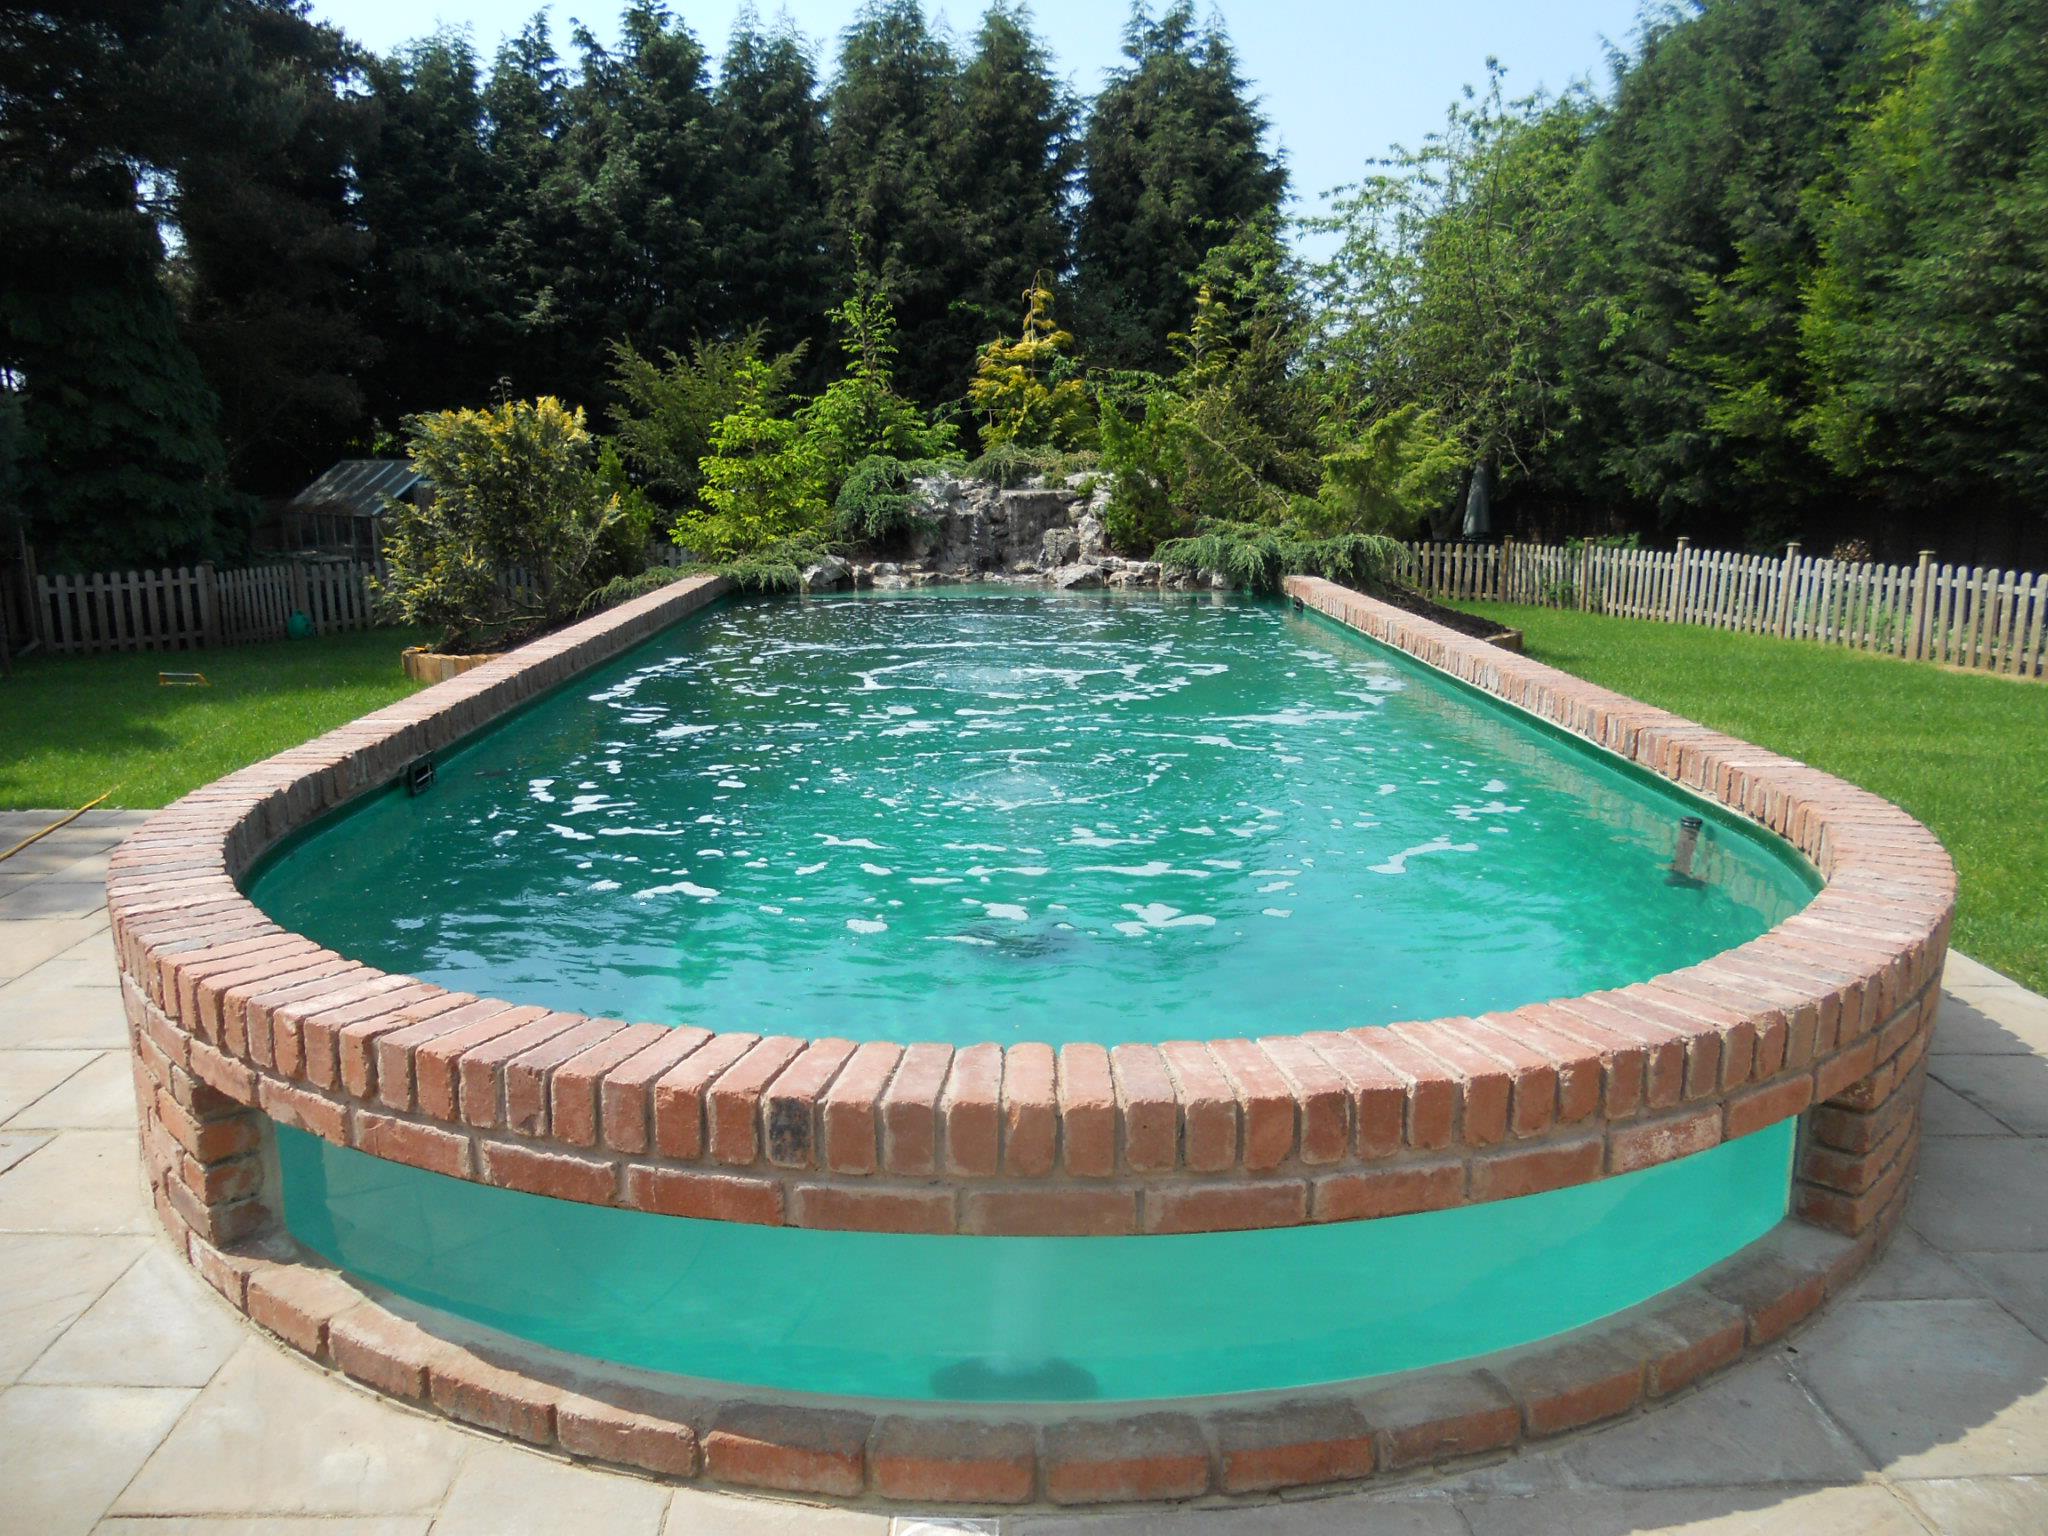 Above Ground Pool - 5 Reasons to Consider Owning One - Dig This Design